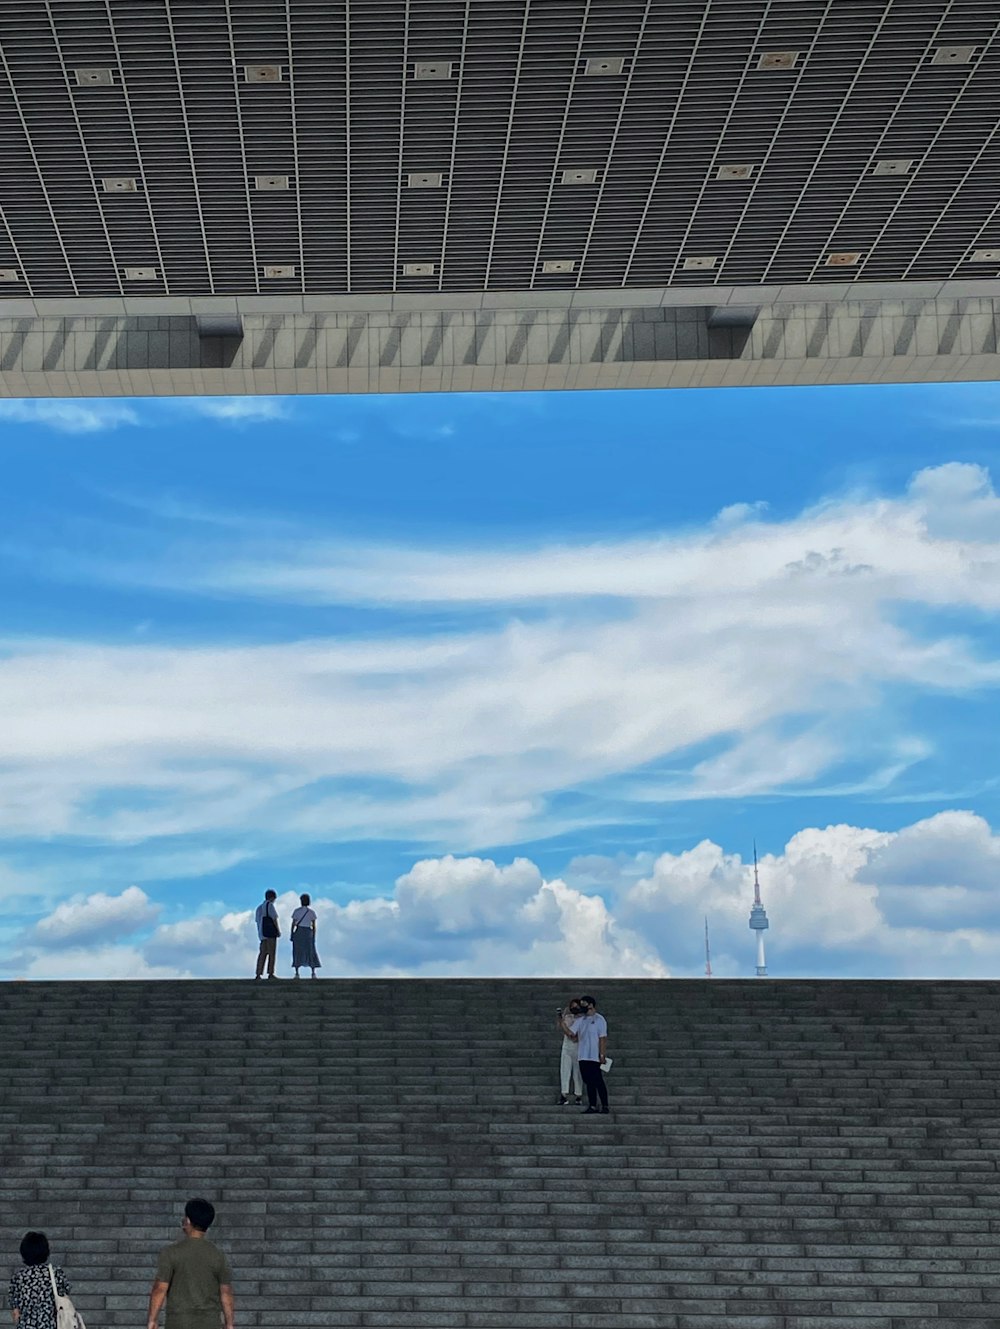 people walking on the roof under blue sky during daytime